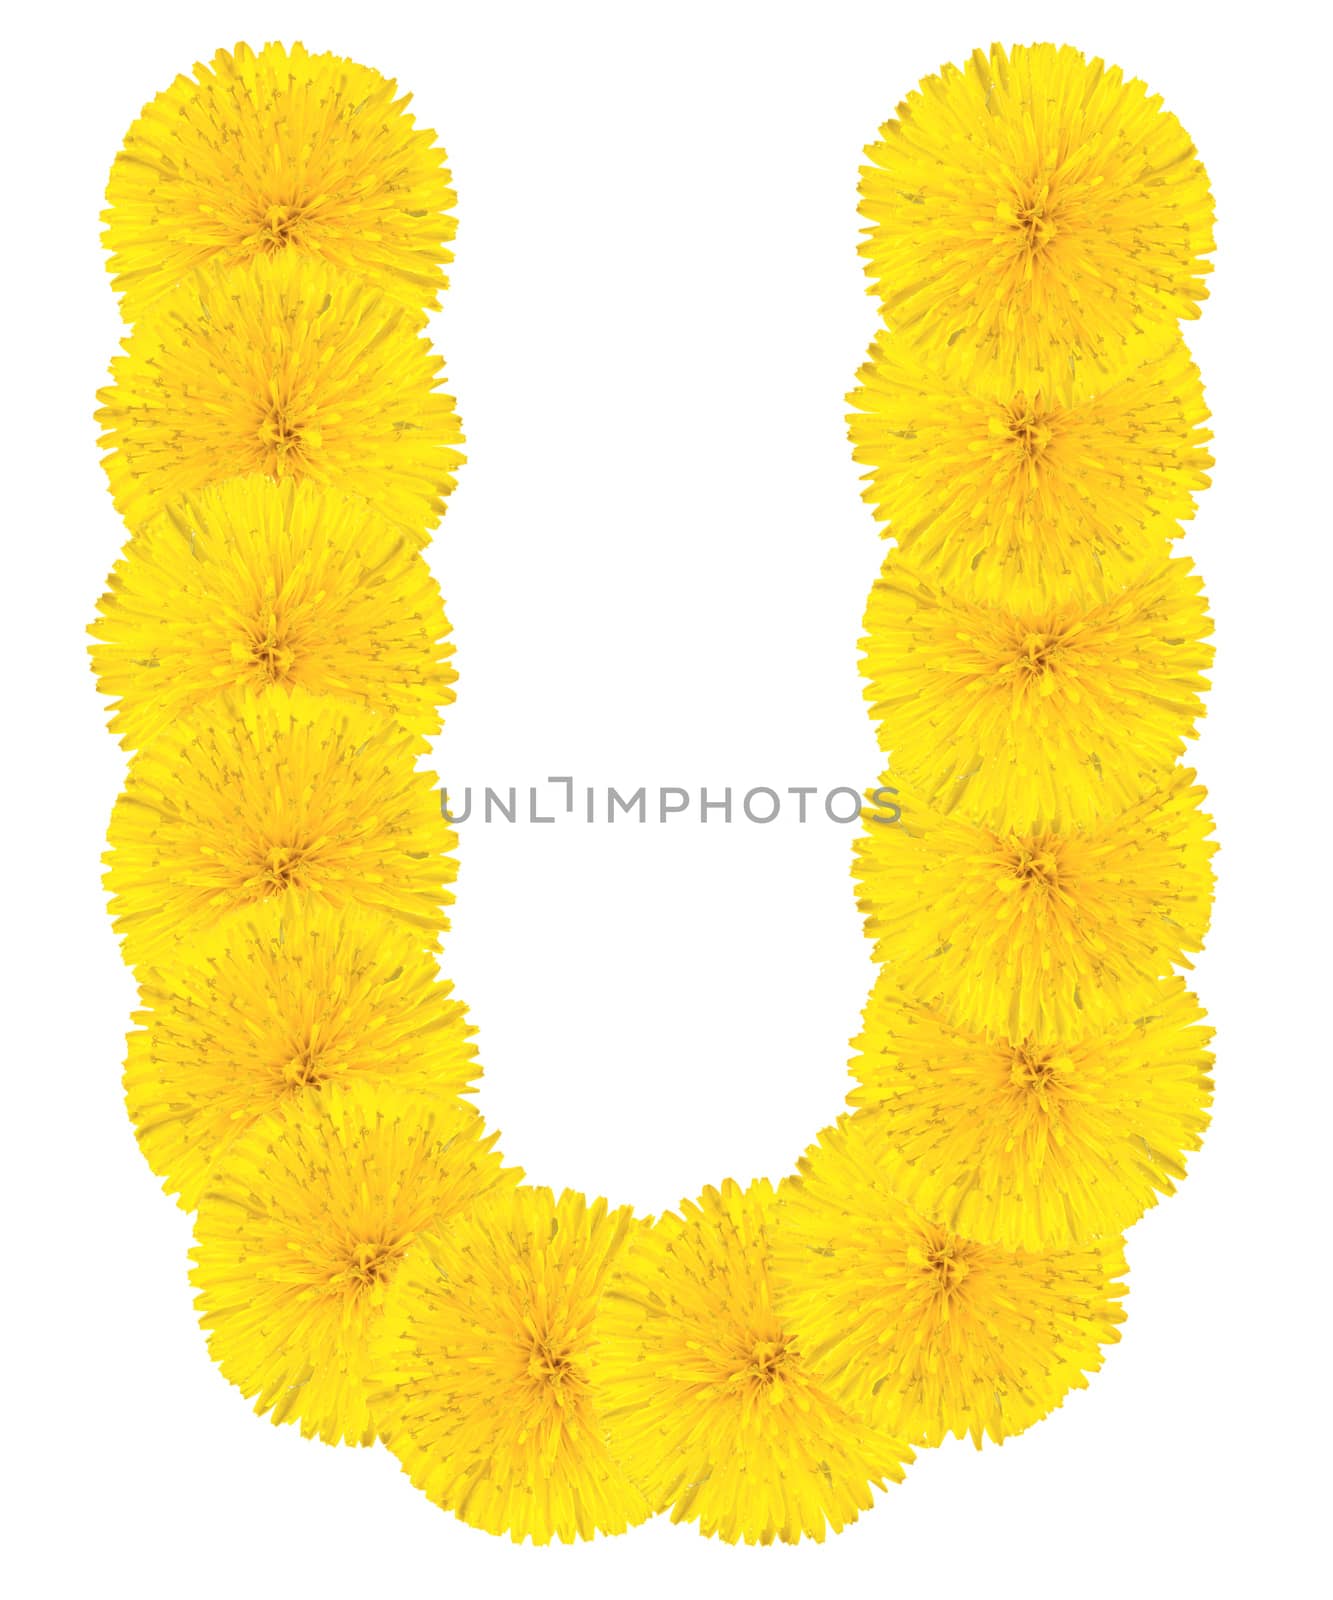 Letter U made from dandelion flowers isolated on white background